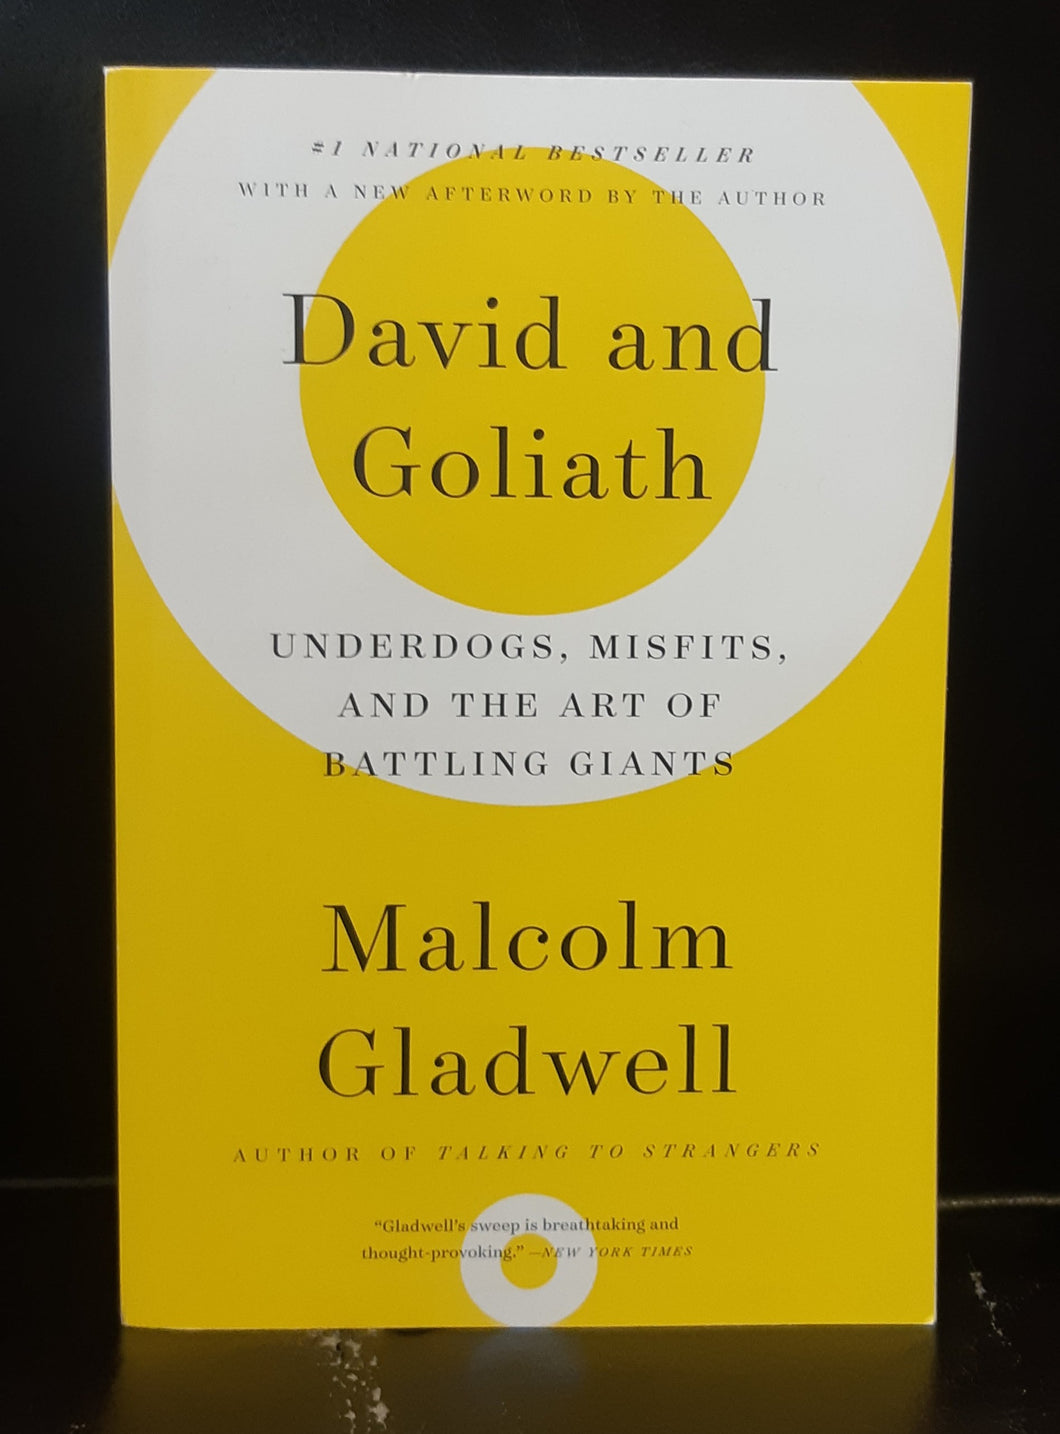 David and Goliath: Underdogs, Misfits and the Art of Battling Giants by Malcolm Gladwell